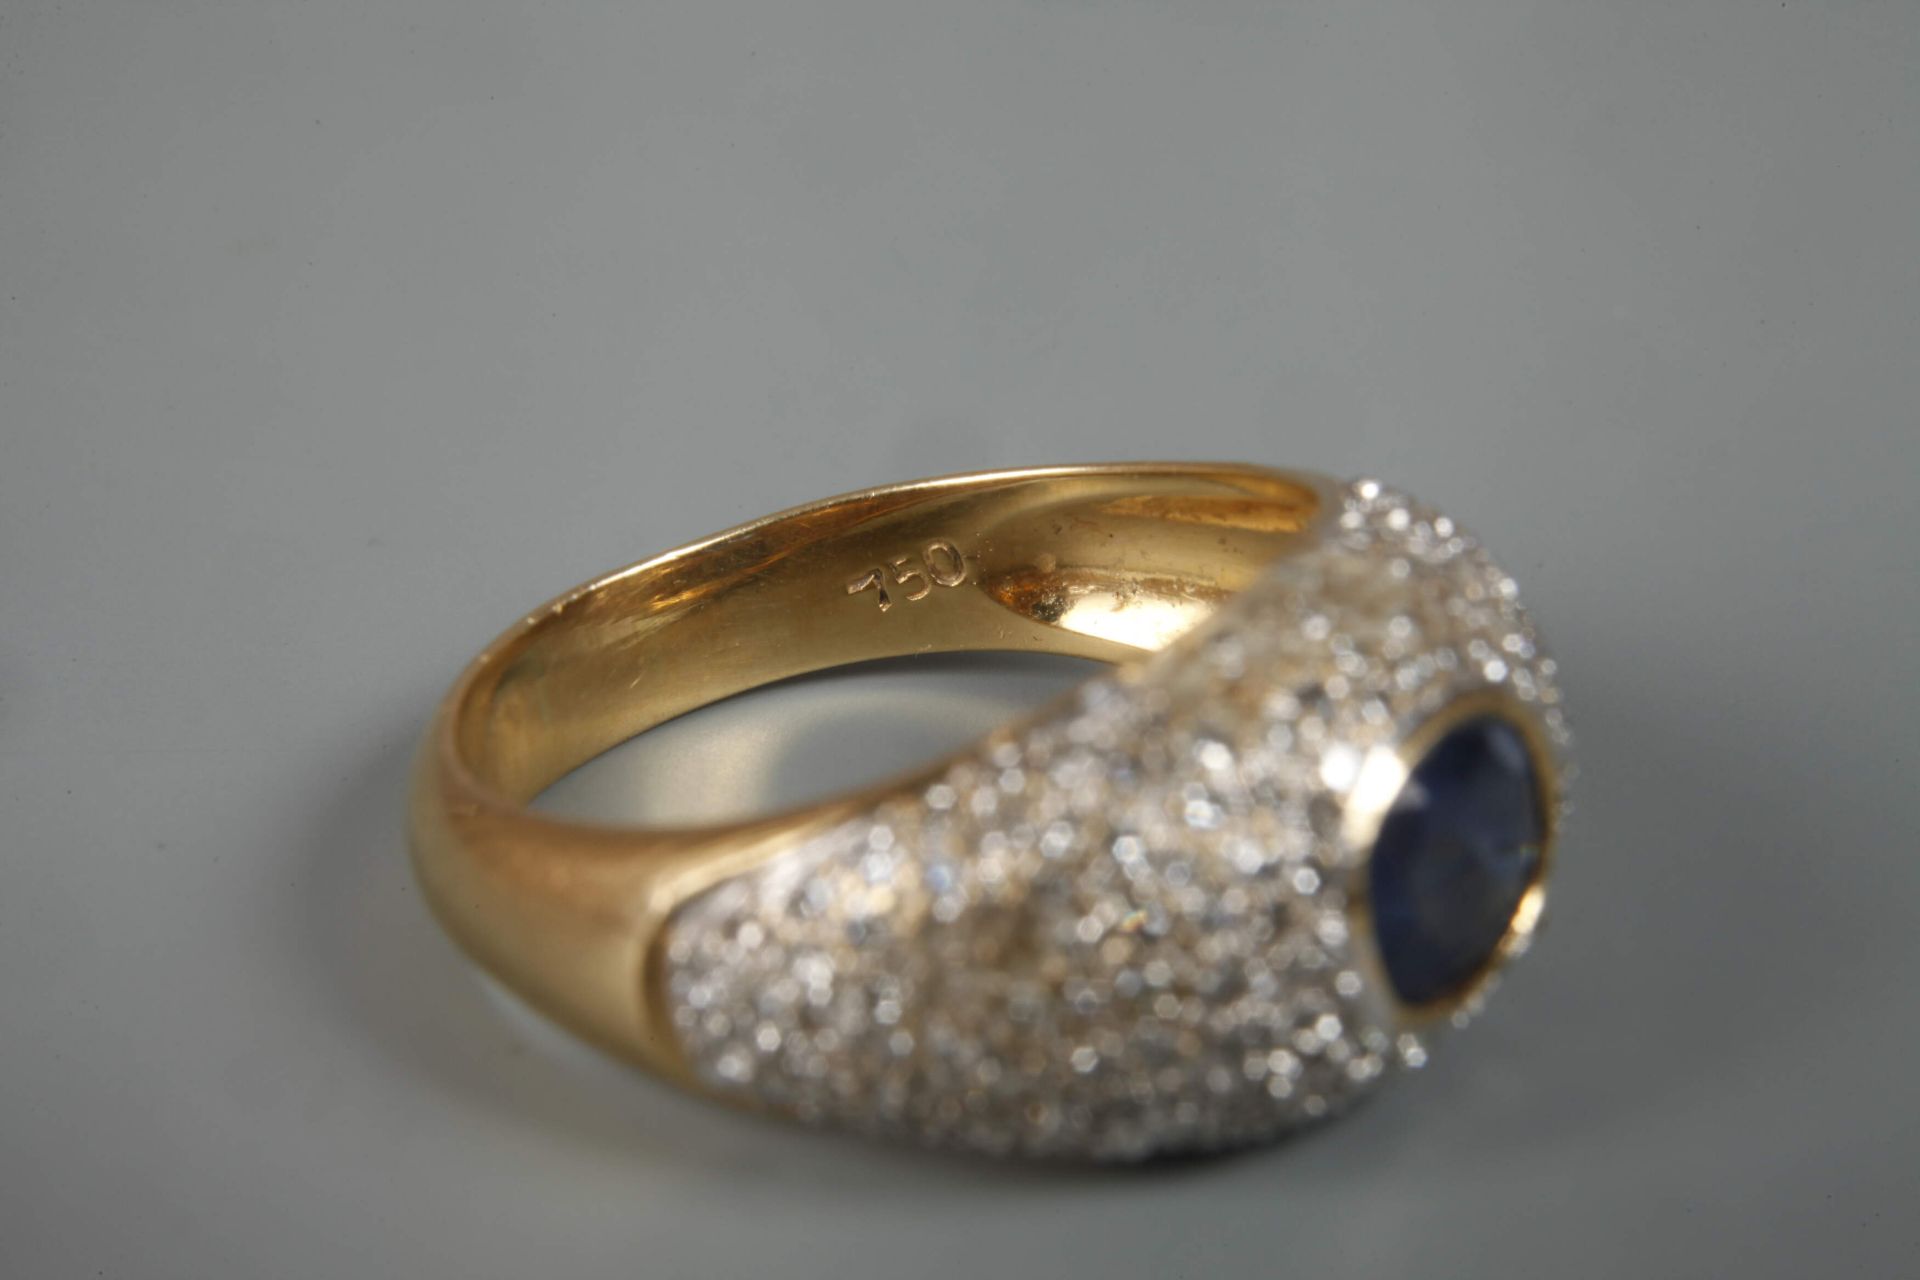 Ladies' ring with sapphire and diamonds - Image 3 of 3